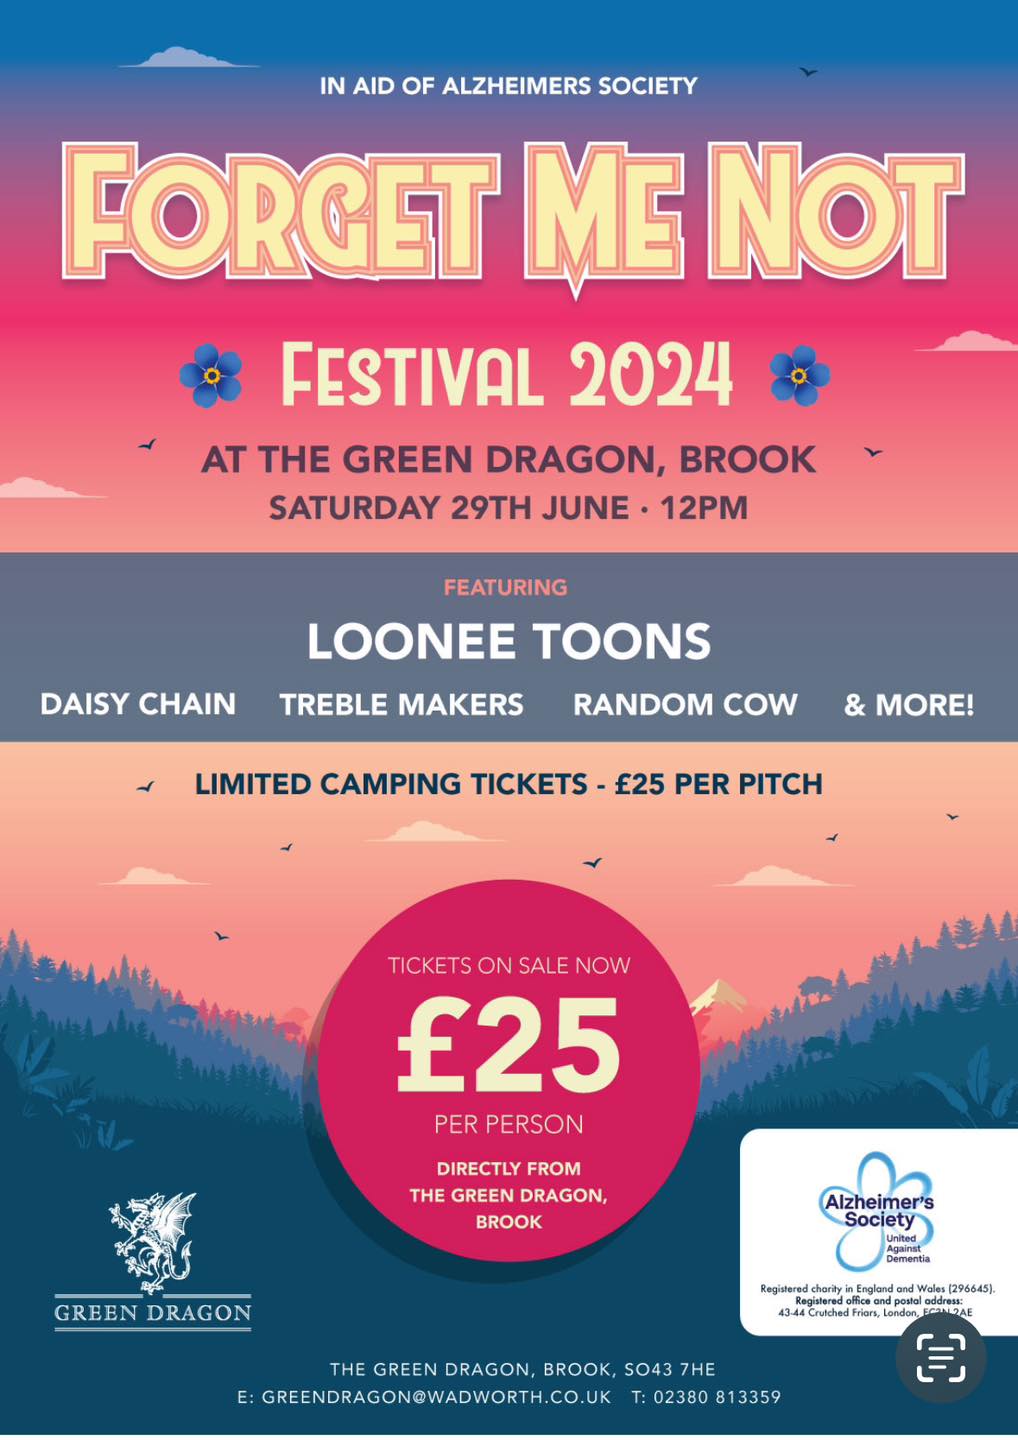 The Alzheimer's Society Forget-Me-Not Charity Festival with THE TREBLEMAKERS + Loonee Toons + Daisy Chain + Random Cow + more